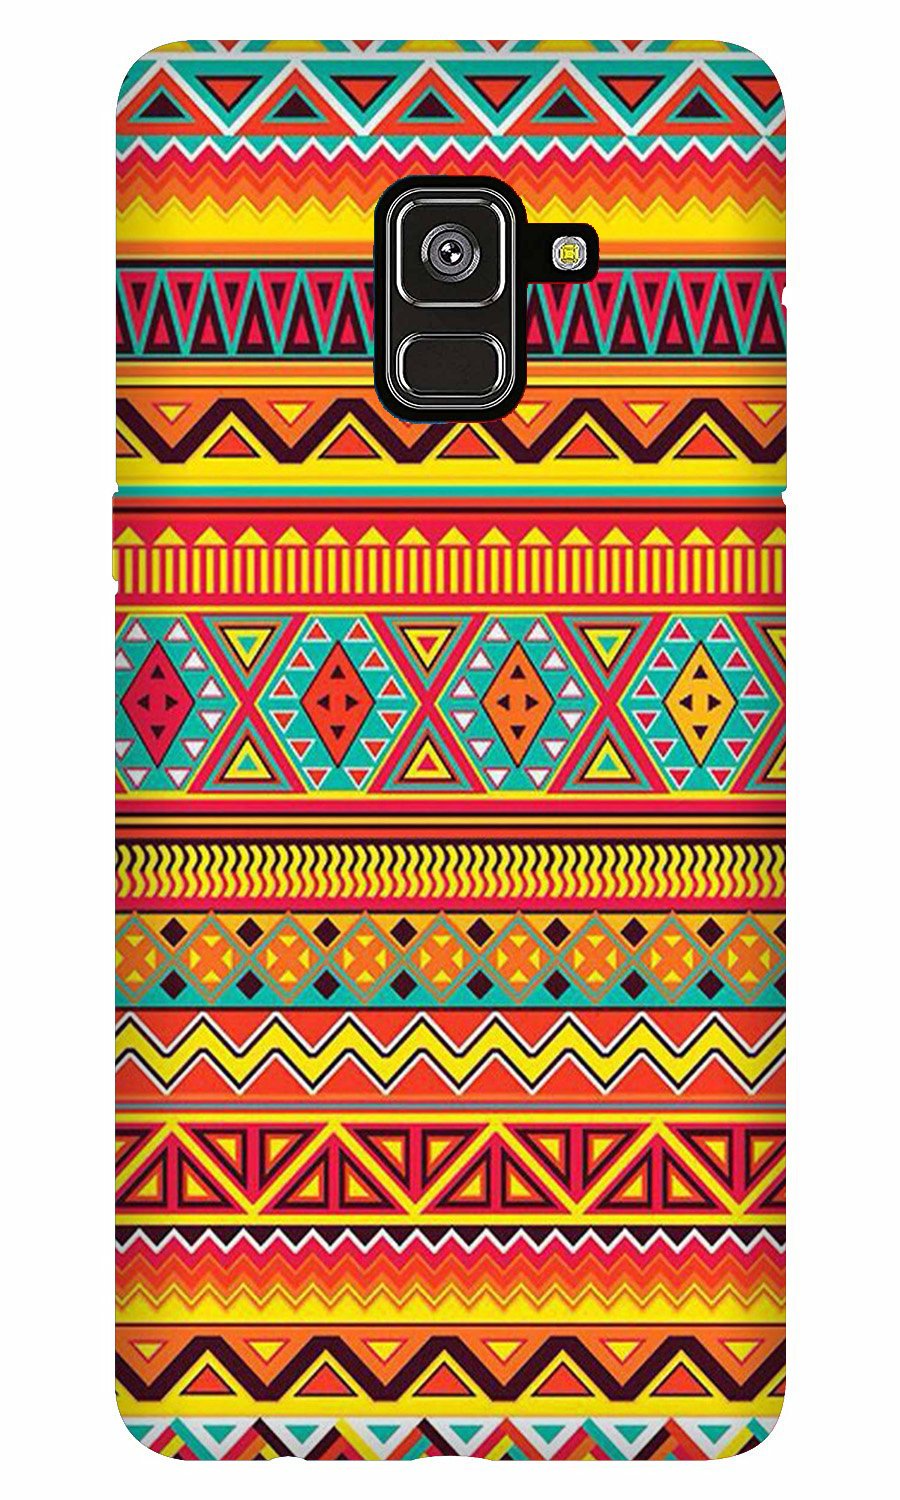 Zigzag line pattern Case for Galaxy A8 Plus